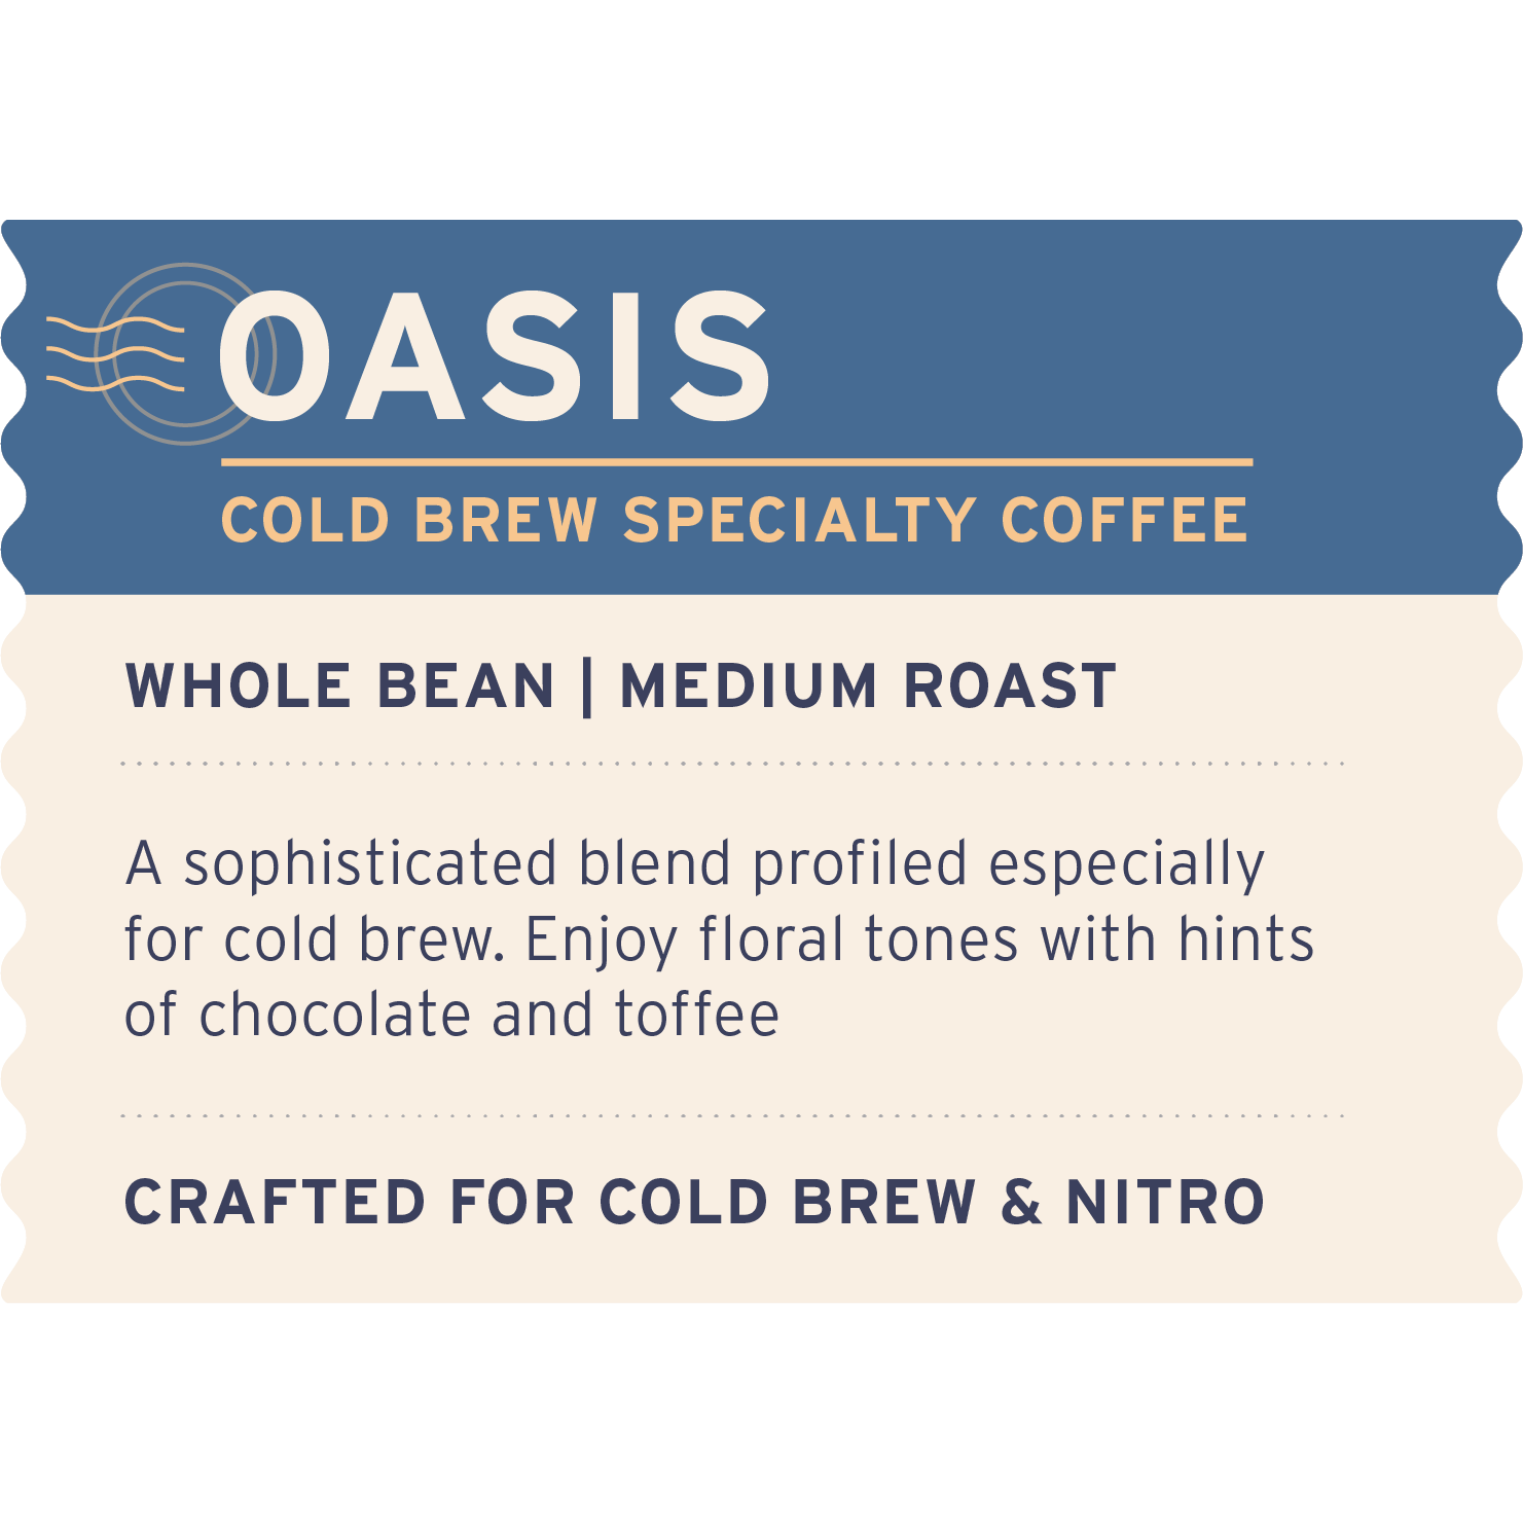 Oasis Cold Brew - Label Detail - Heyday Coffee Co.